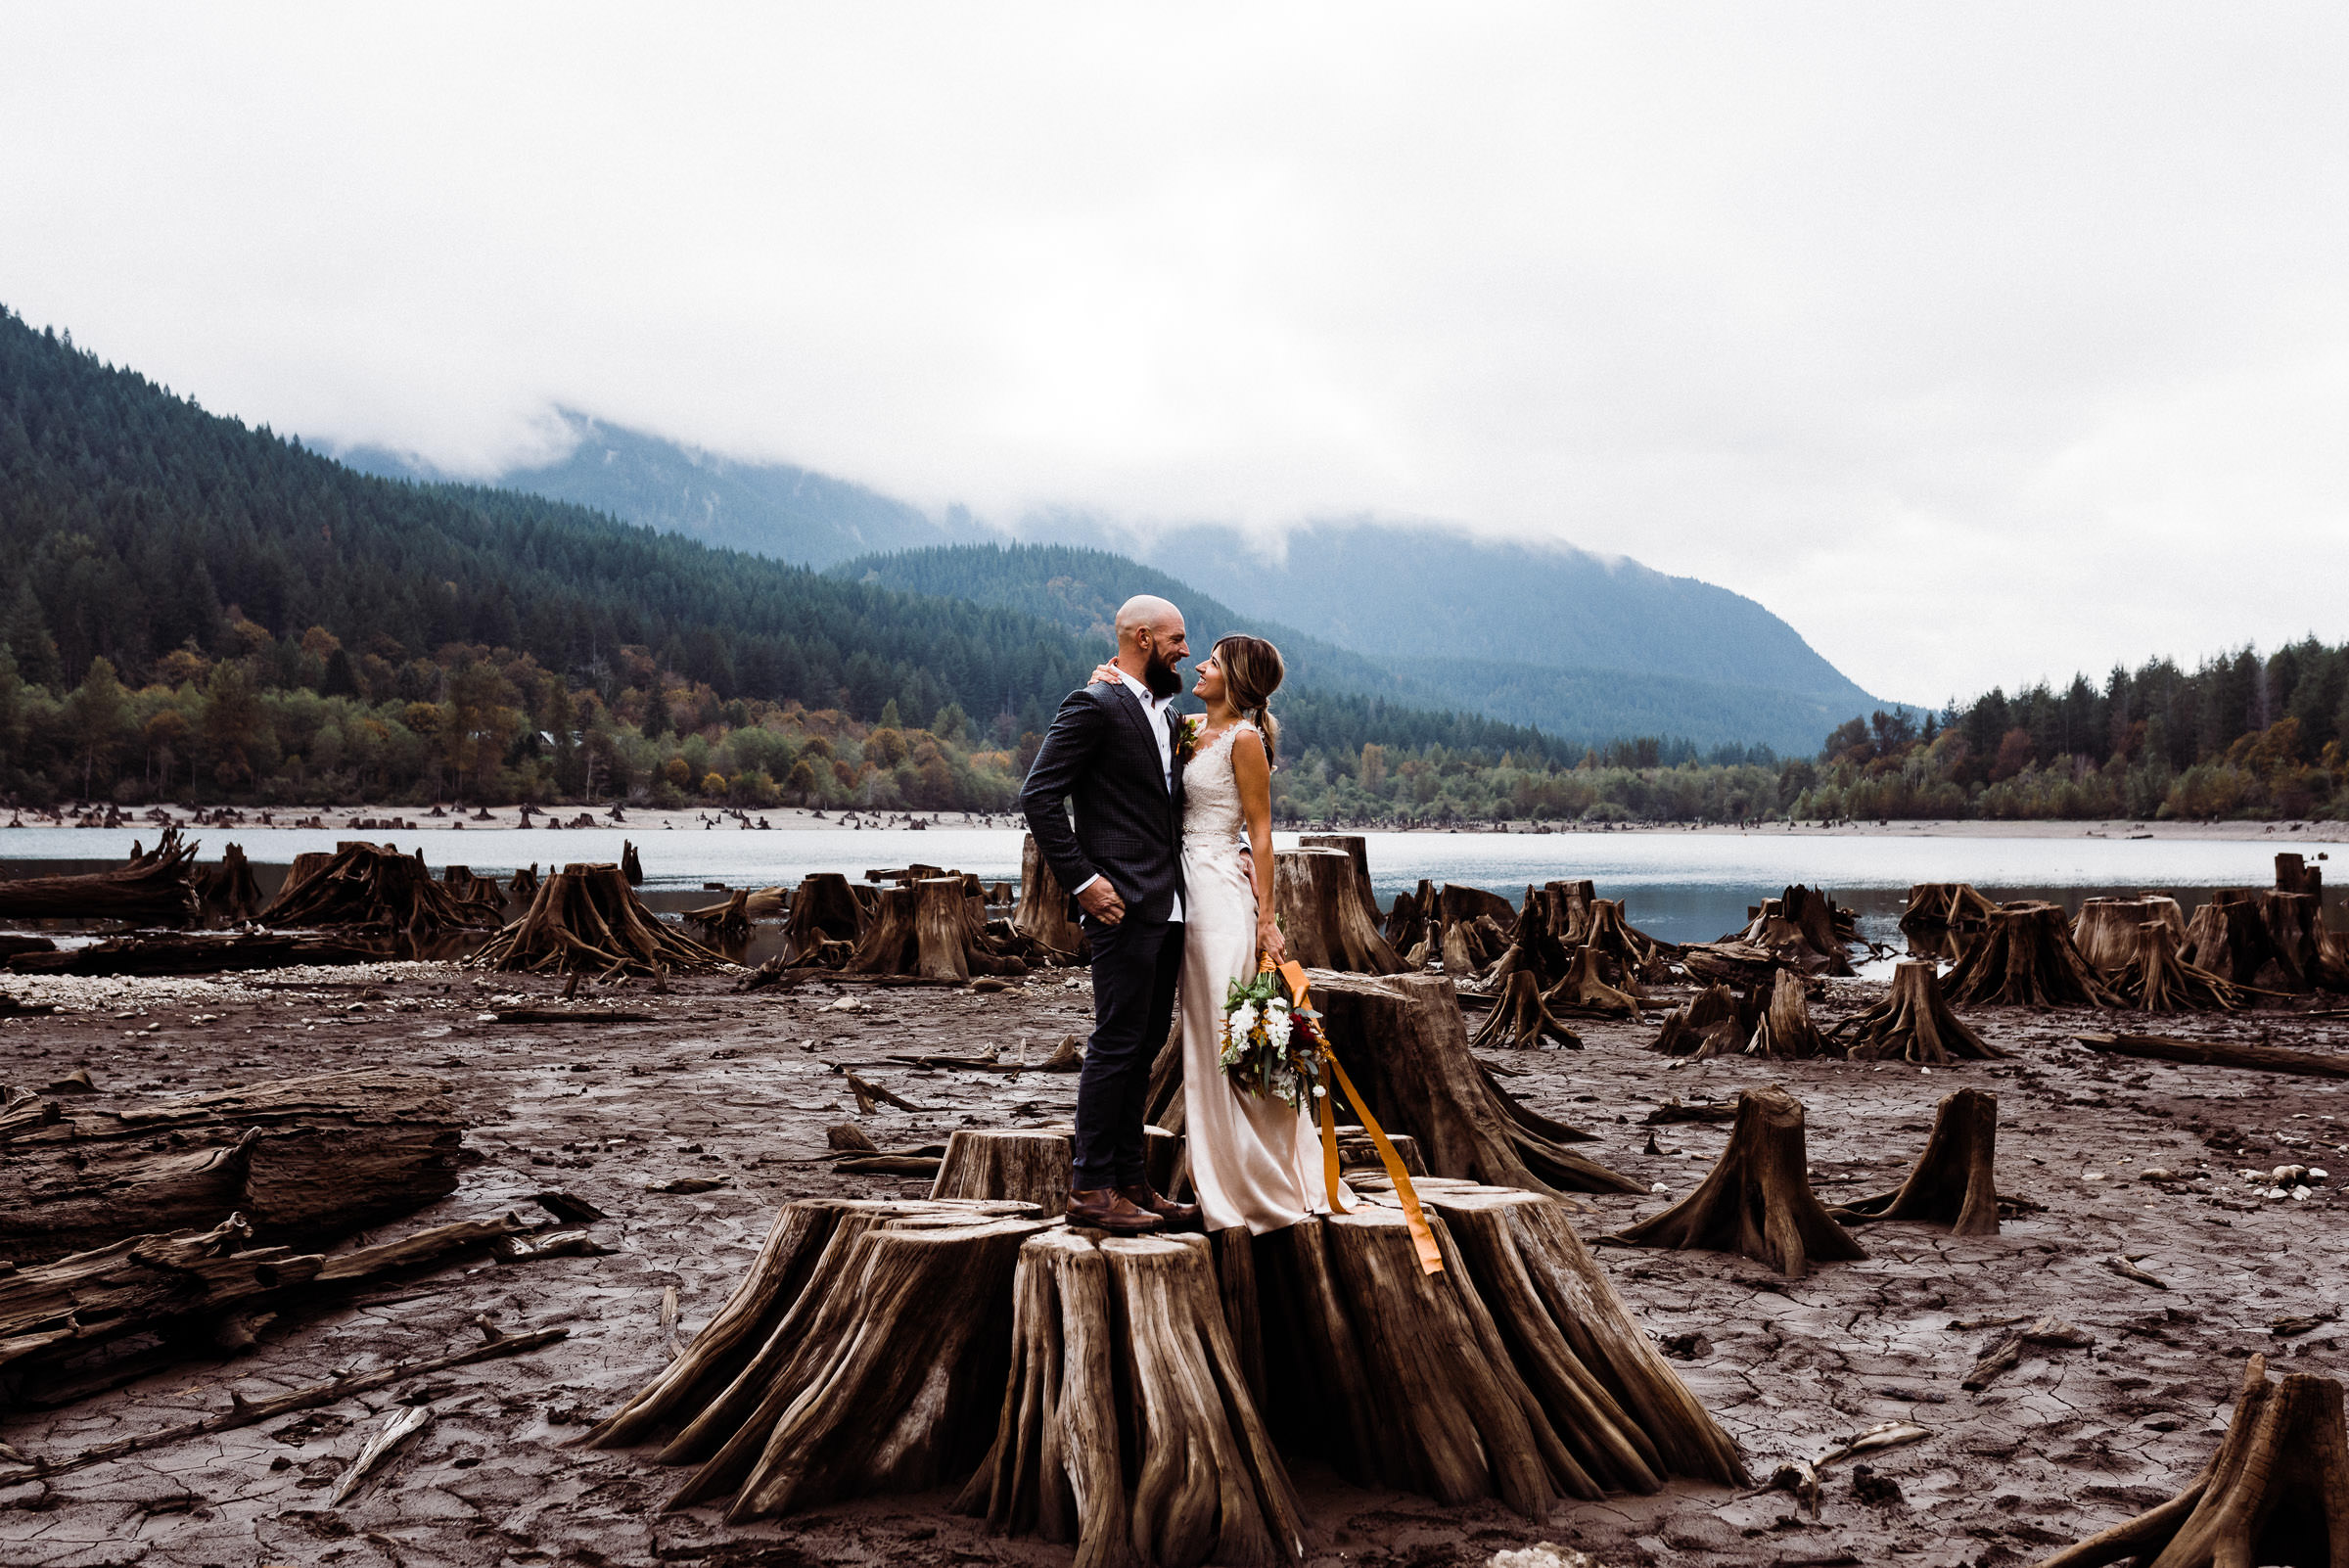 A bride and groom standing on a tree stump during their Seattle elopement.